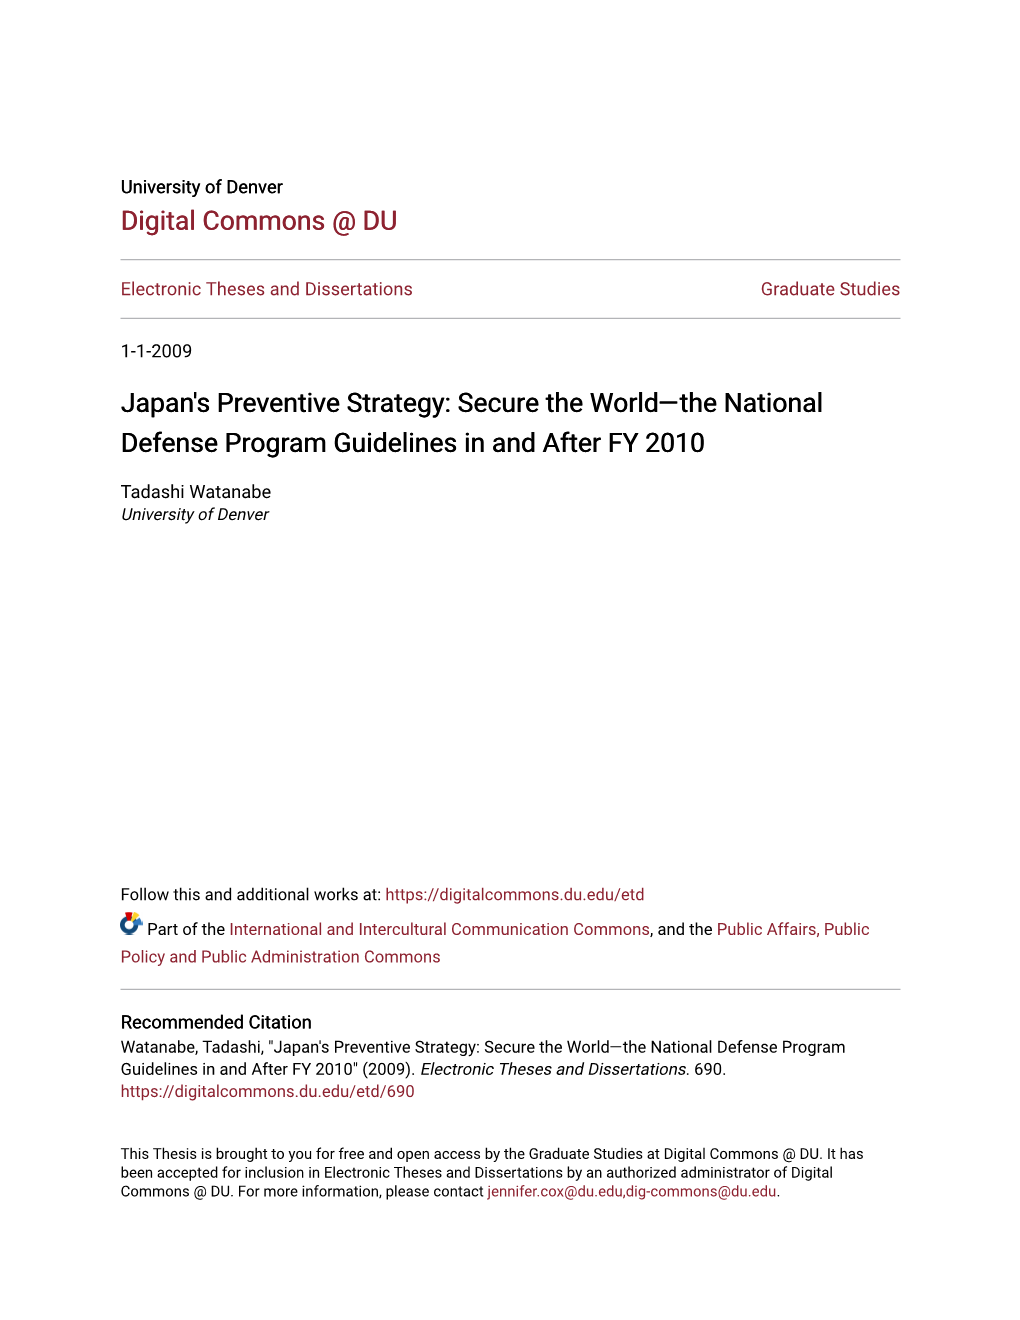 Japan's Preventive Strategy: Secure the World—The National Defense Program Guidelines in and After FY 2010